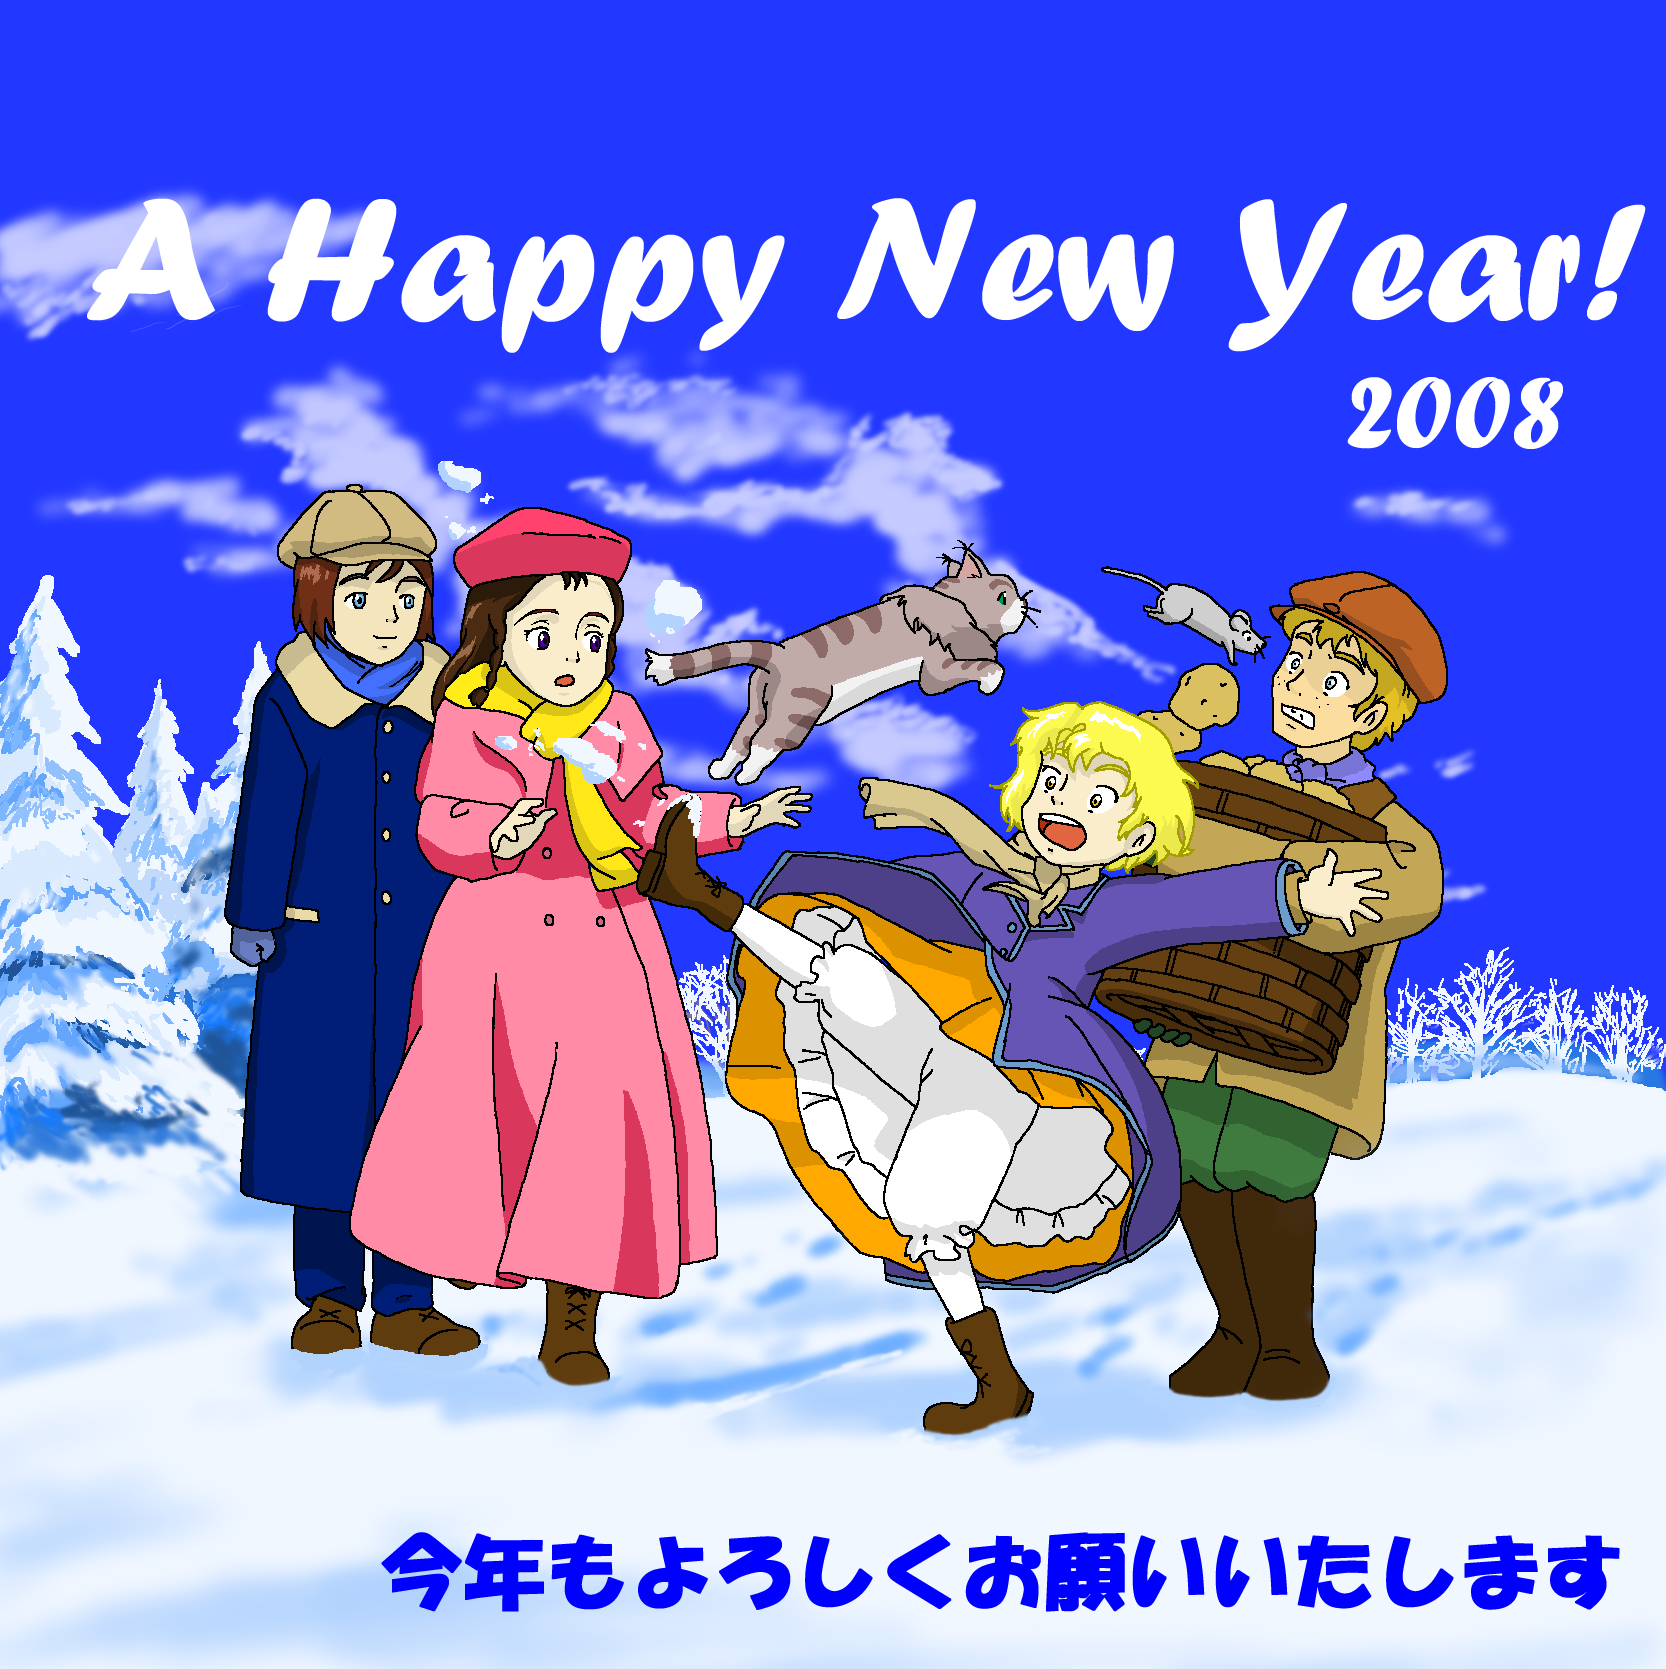 『A Happy New Year! 2008（風の少女エミリー）』 illustrated by ある名作ファン